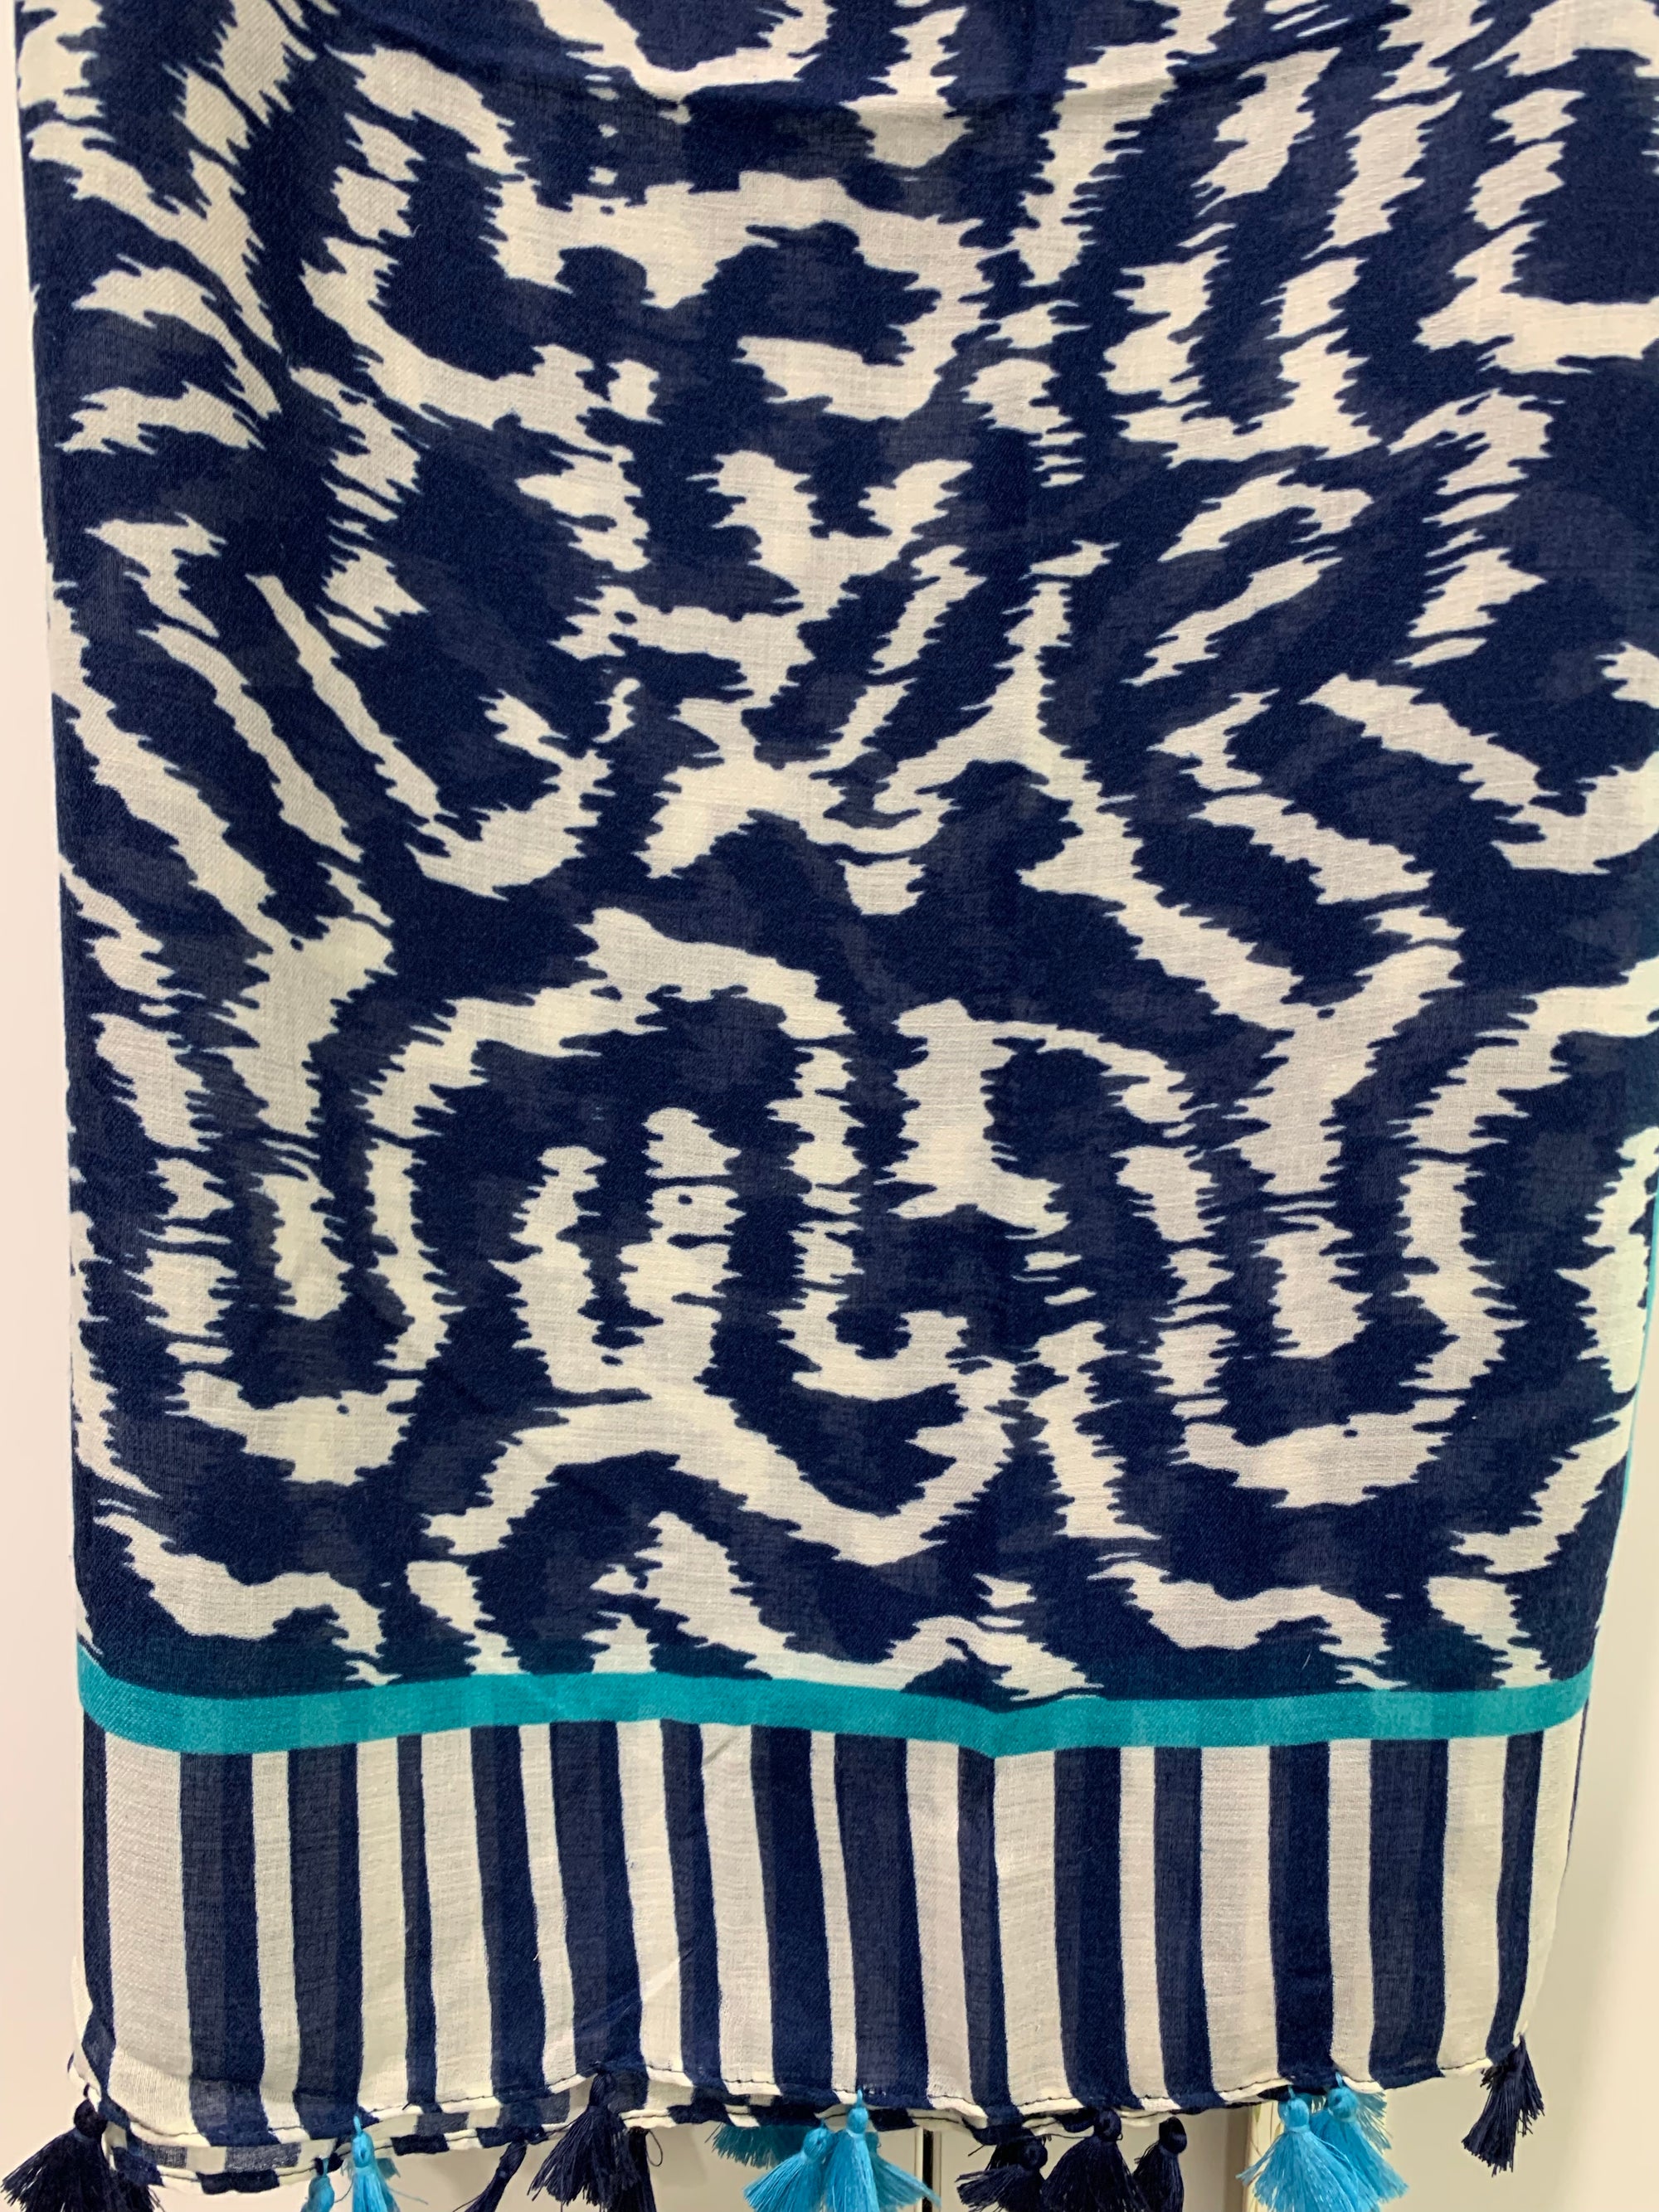 Oversized Scarf in Navy Blue & White Animal Print with Tassel Detail - Willow Tree